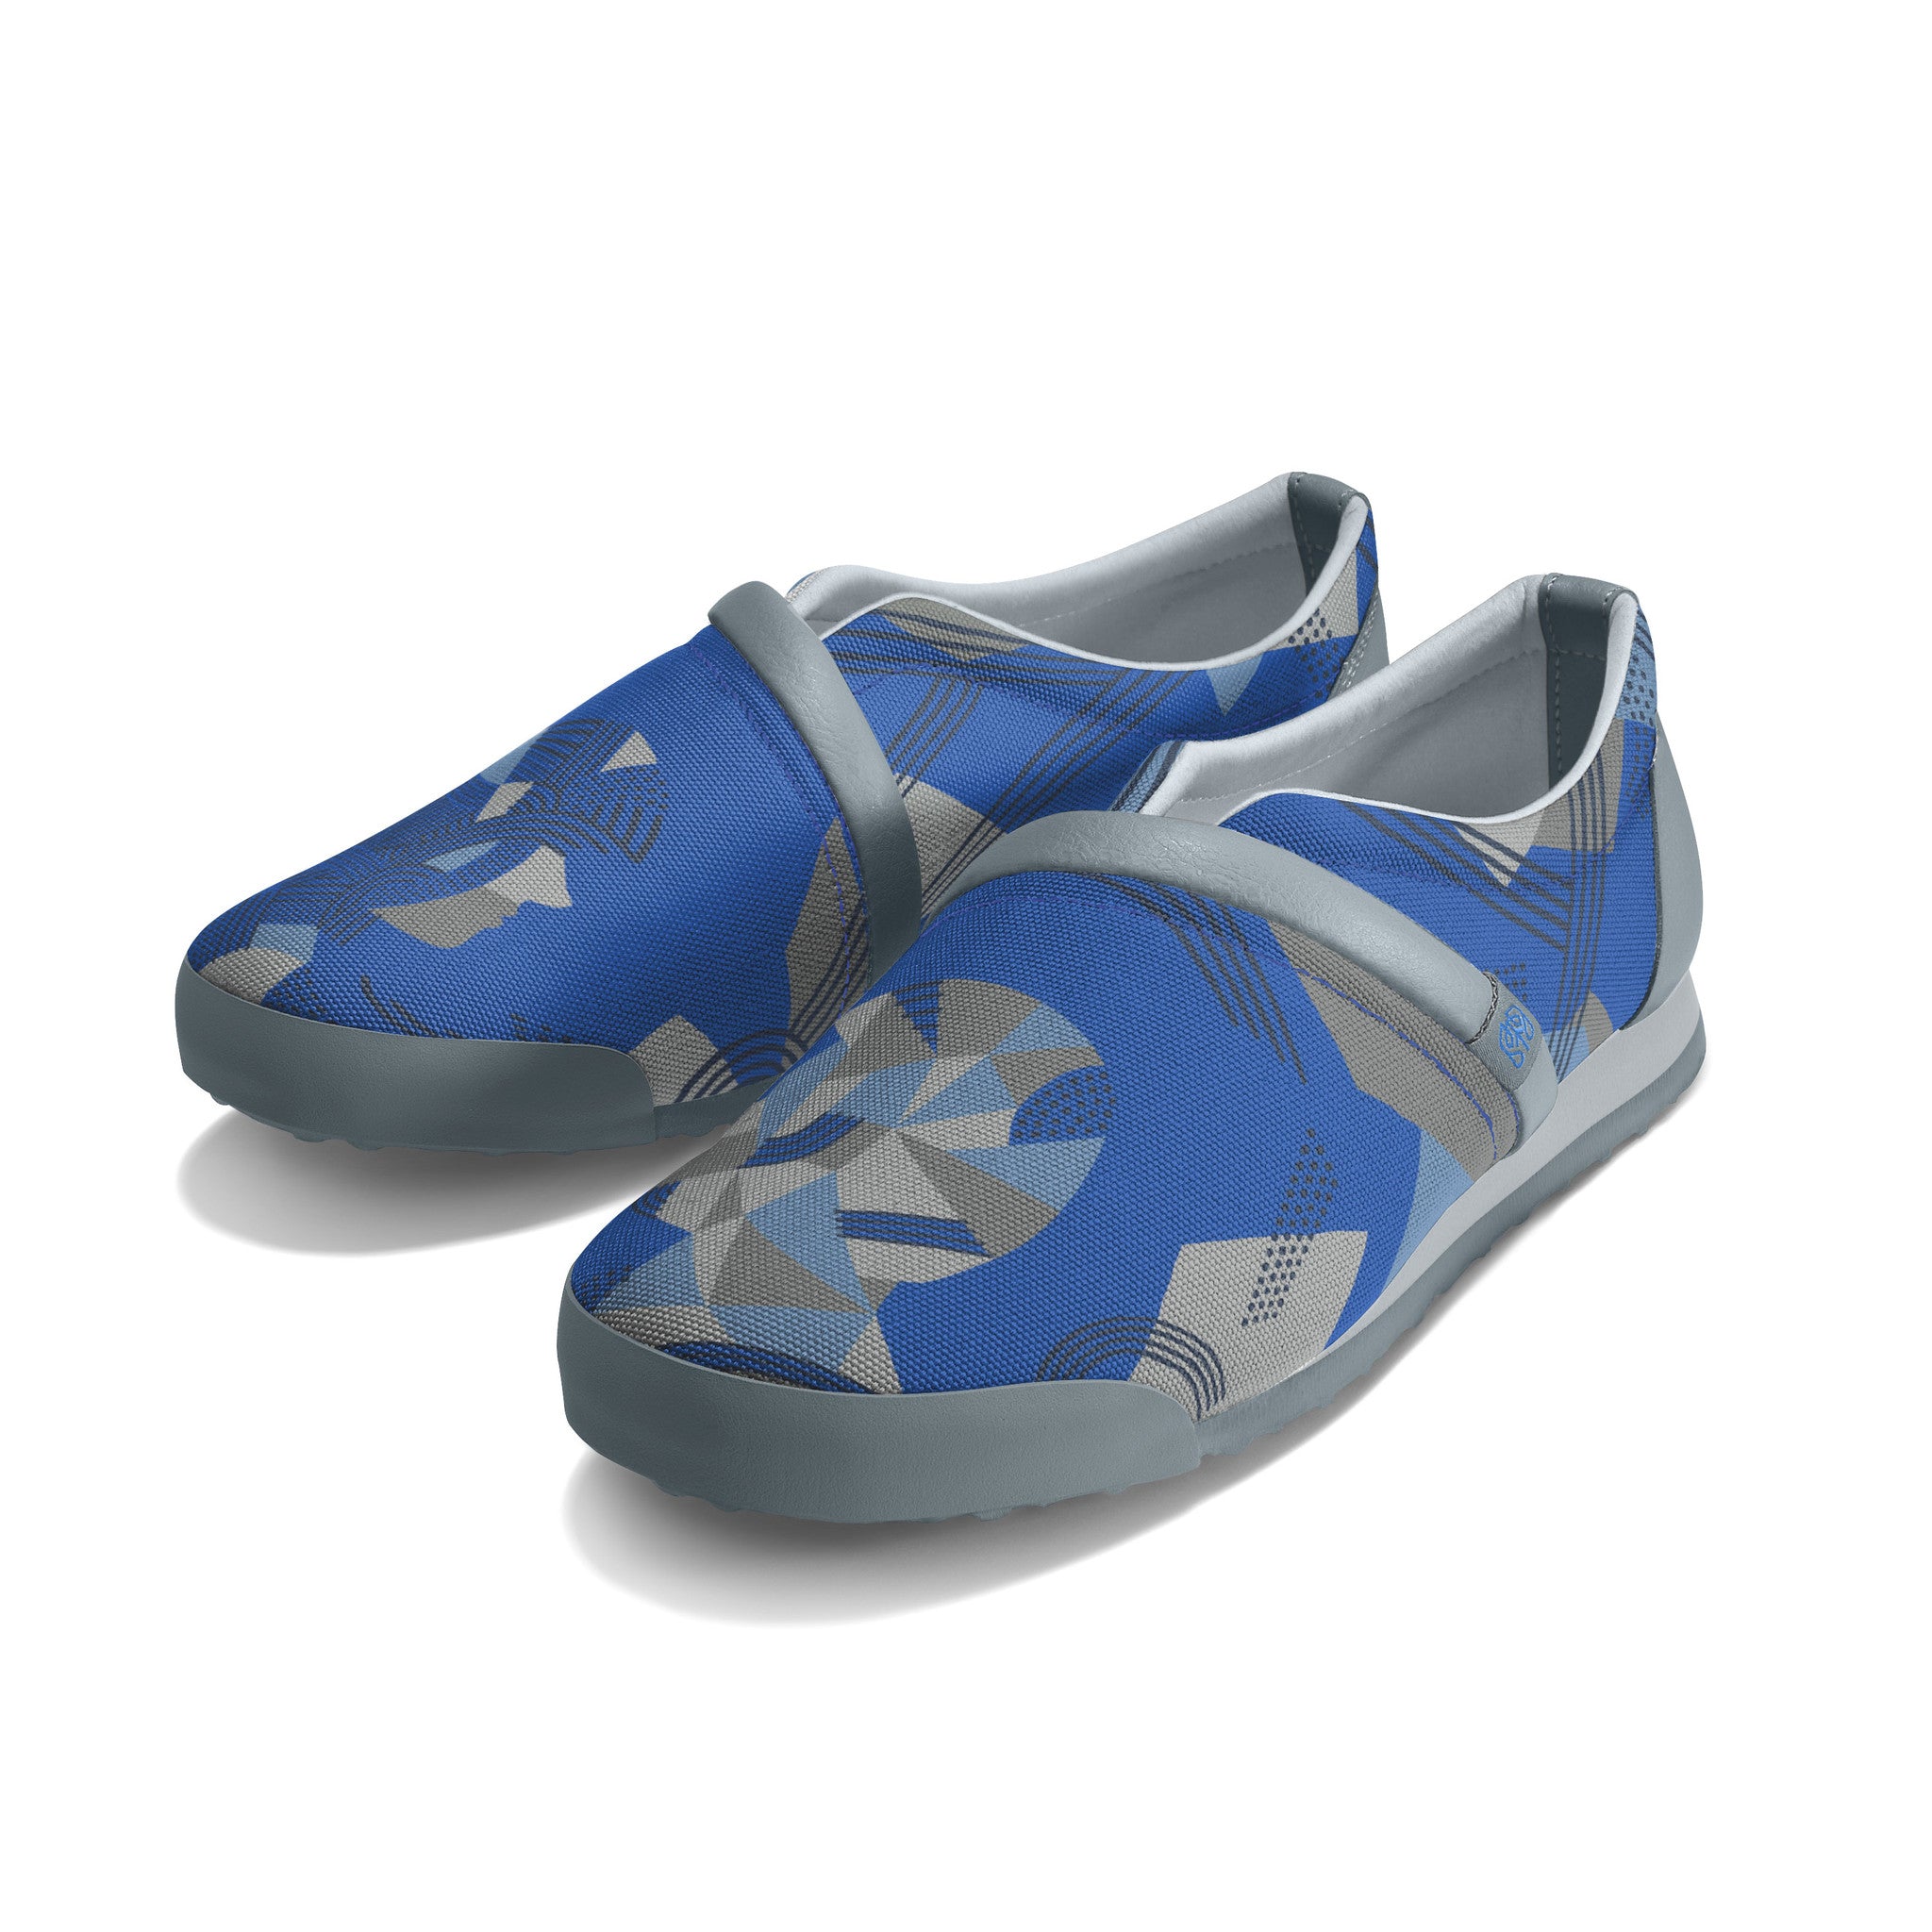 Strong_Blue - Common Ground Footwear Shoes Left Perspective View